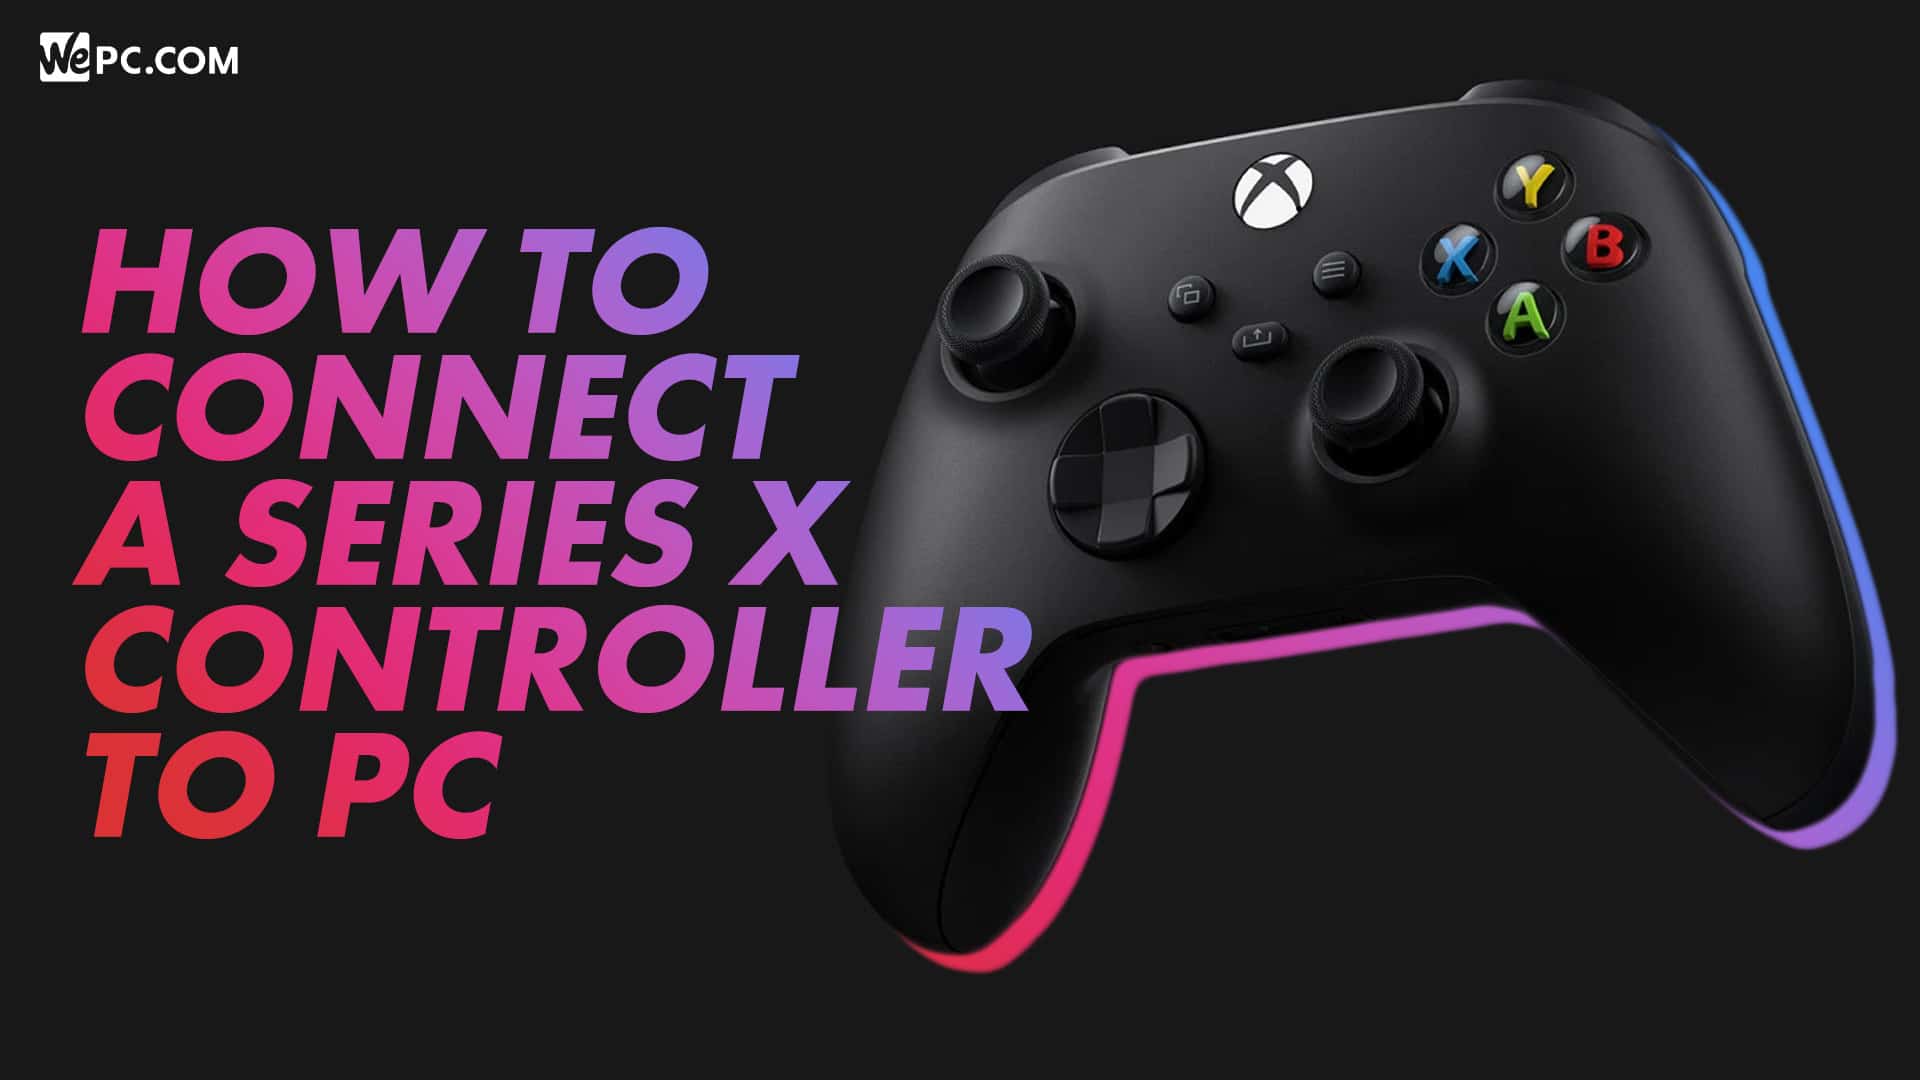 limit Nevertheless Impure How to use an Xbox Series X / Series S controller on a PC | WePC